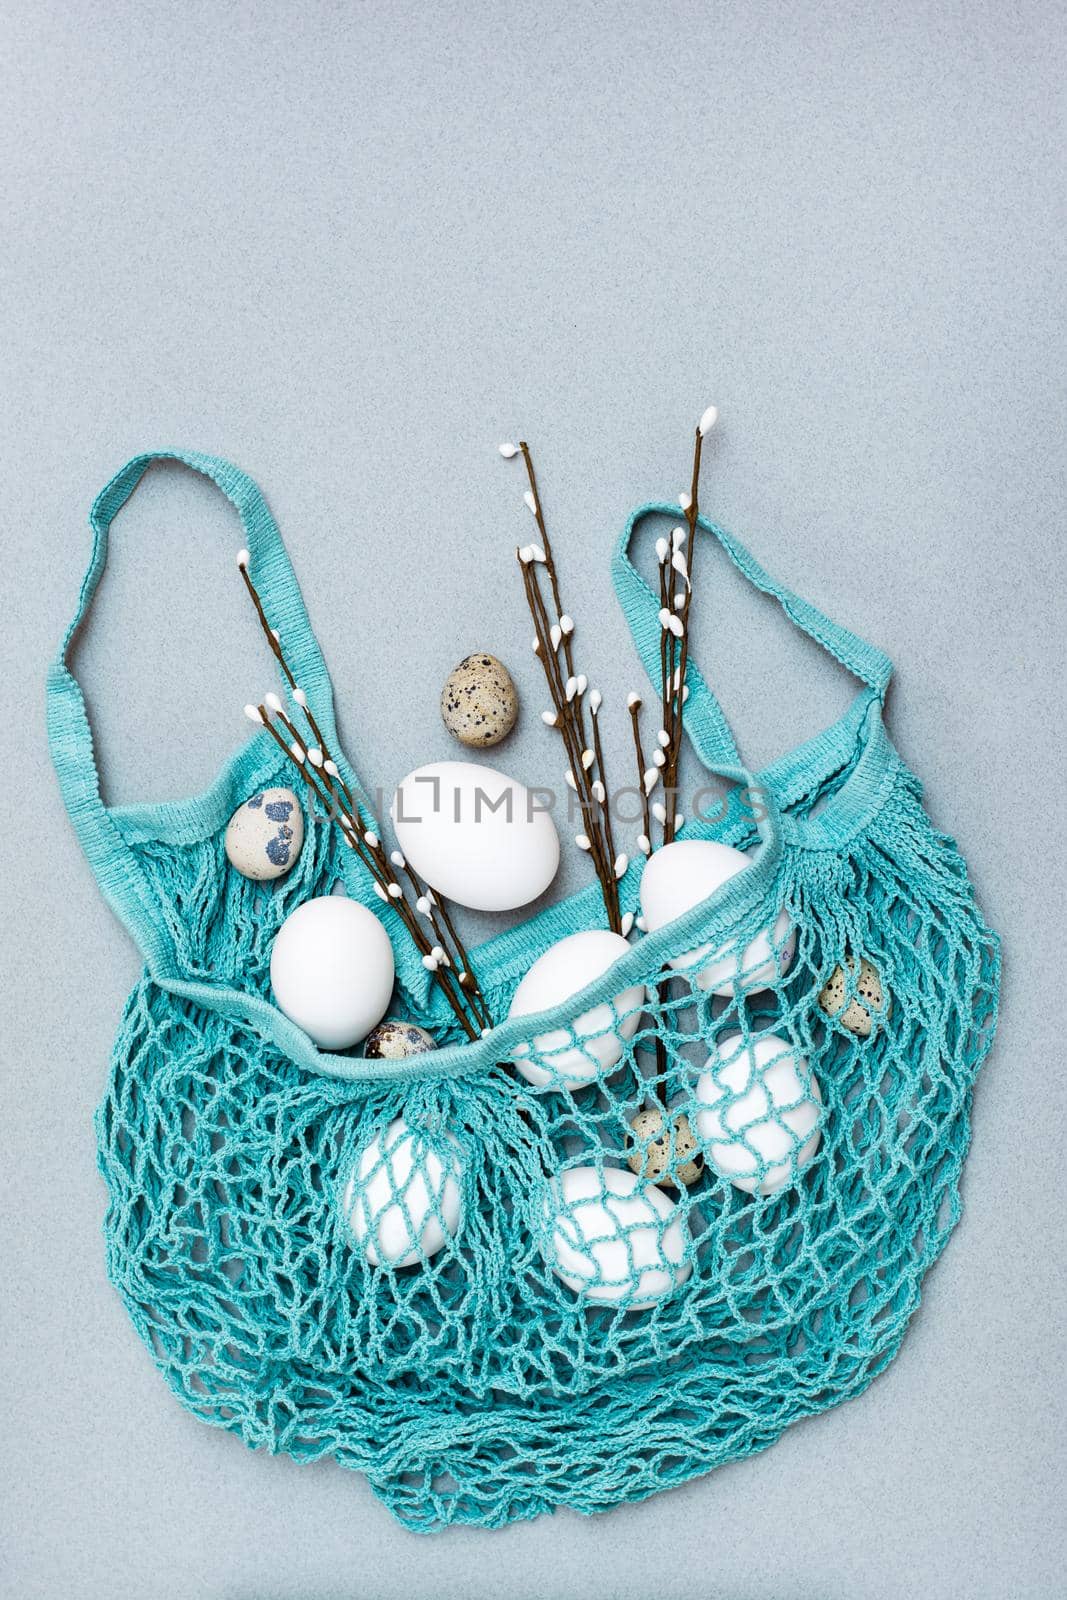 Happy Easter. Eggs and pussy willow branches in a mesh bag on a gray background. Top view by Aleruana